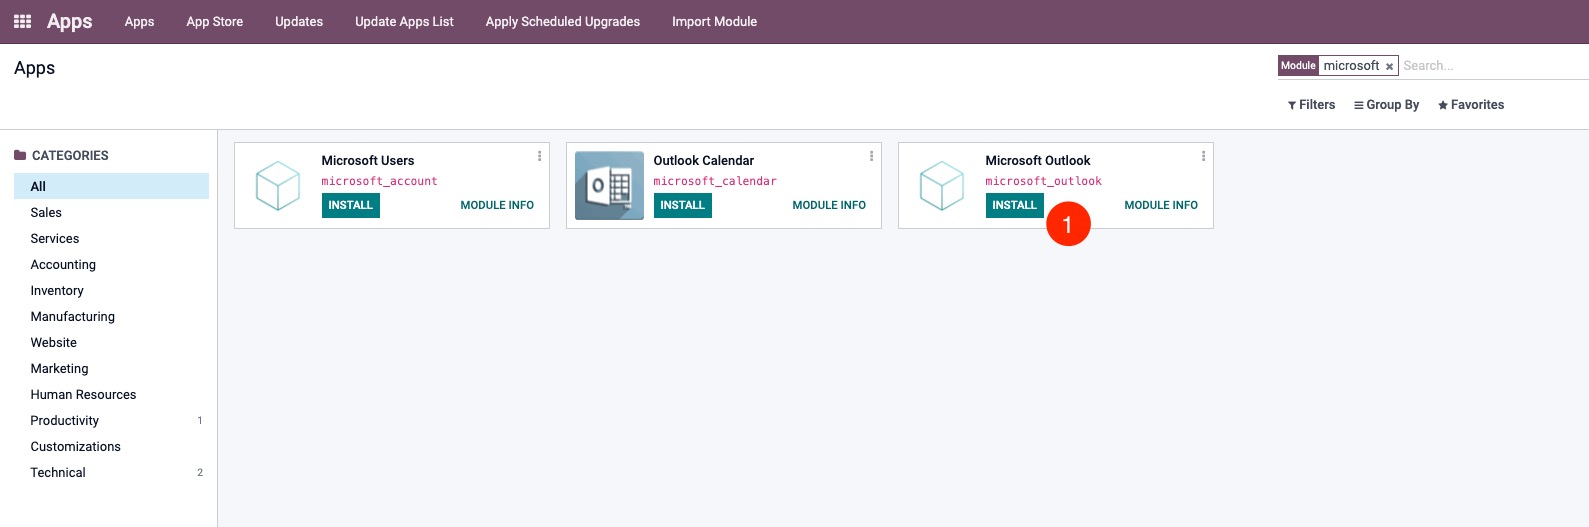 Finding the Microsoft Outlook app in Odoo versions <16